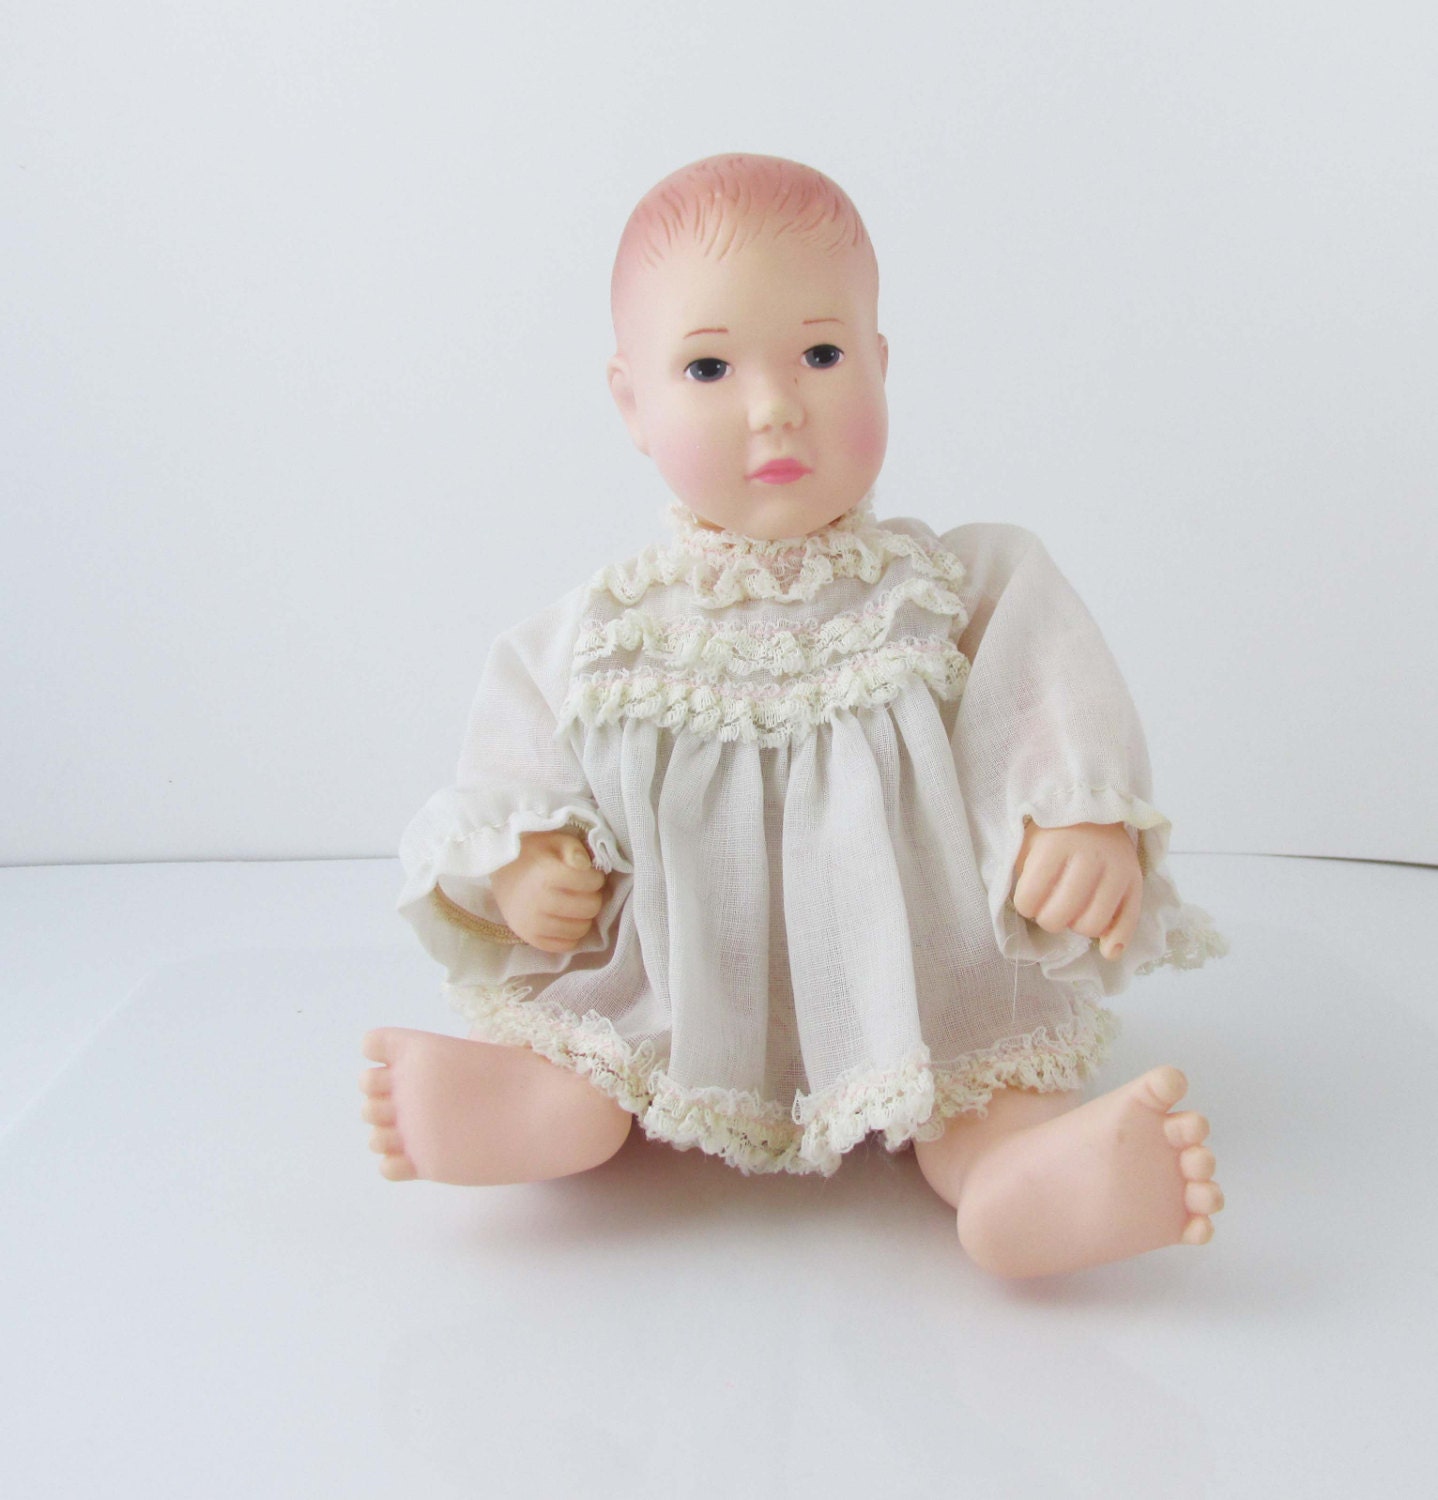 Baby Dolls From the 1980s - Bing images